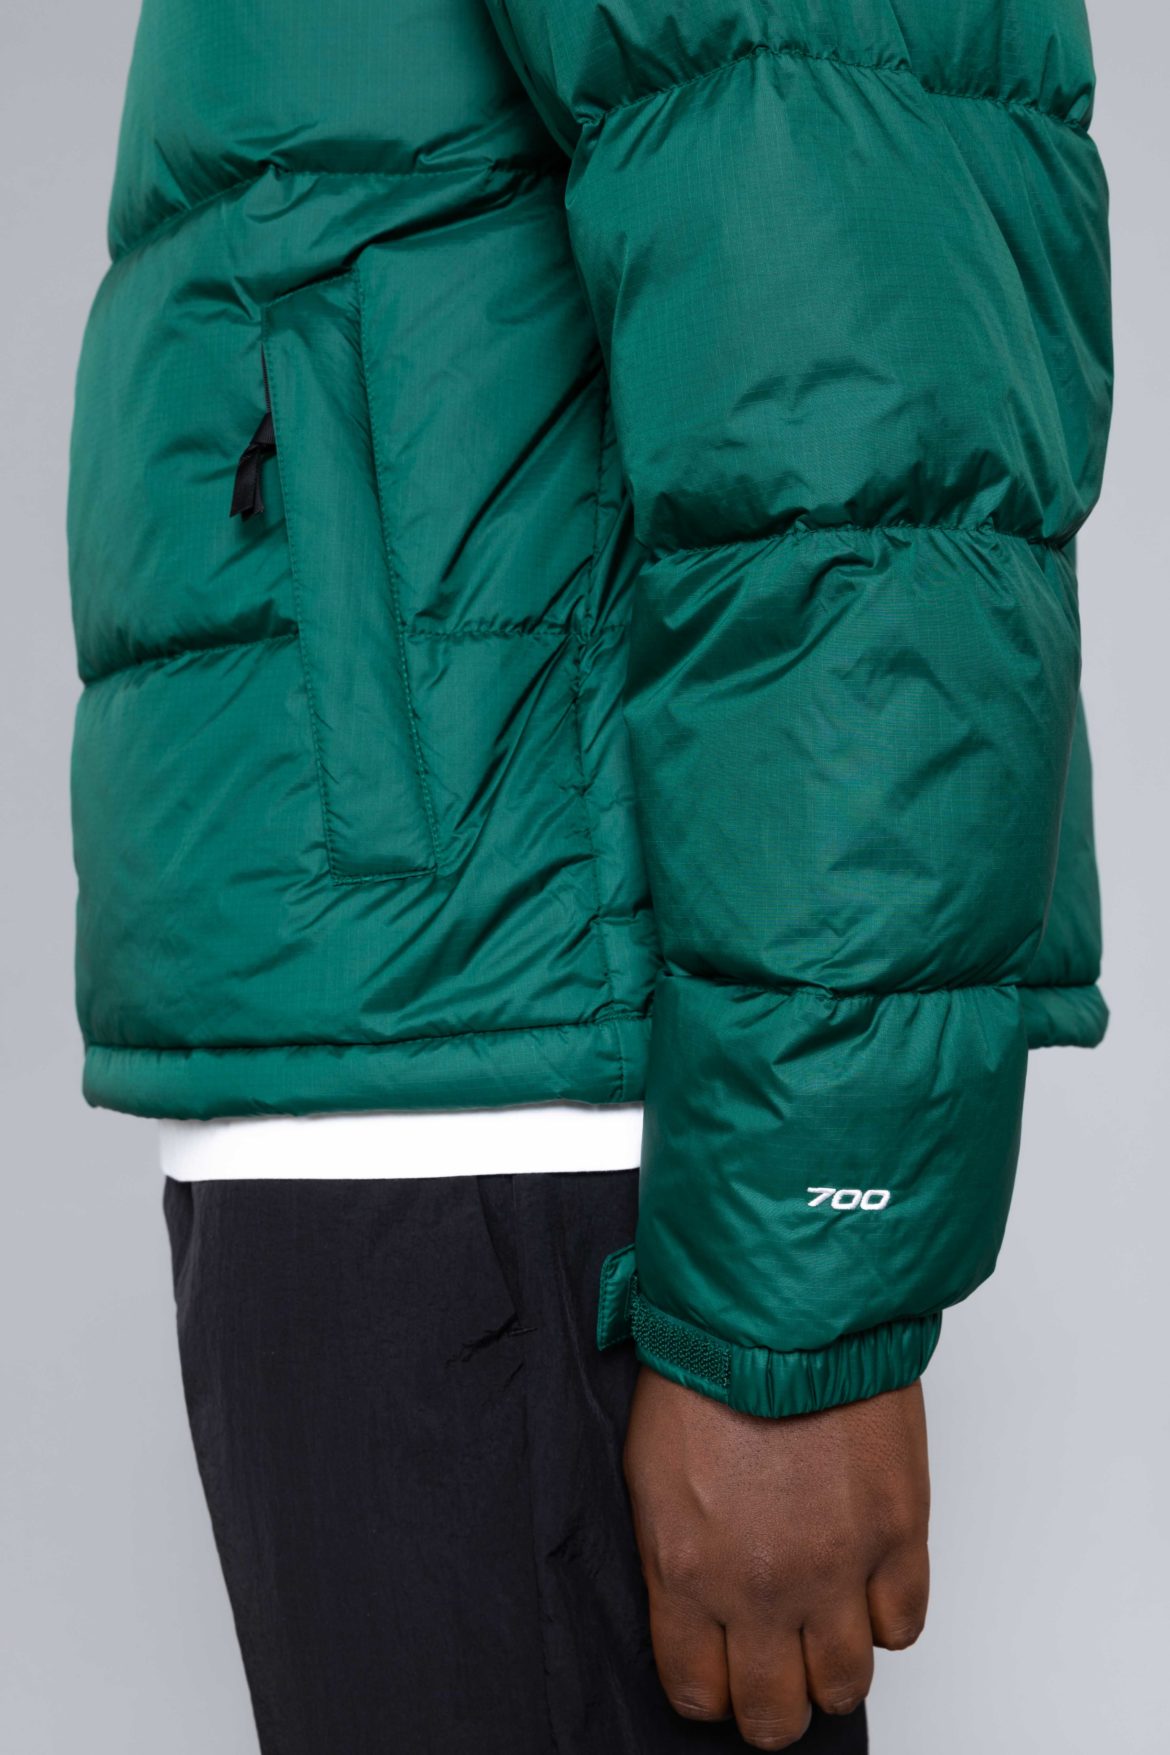 The North Face 1996 Nuptse Down Jacket Green Online Shopping For Women Men Kids Fashion Lifestyle Free Delivery Returns